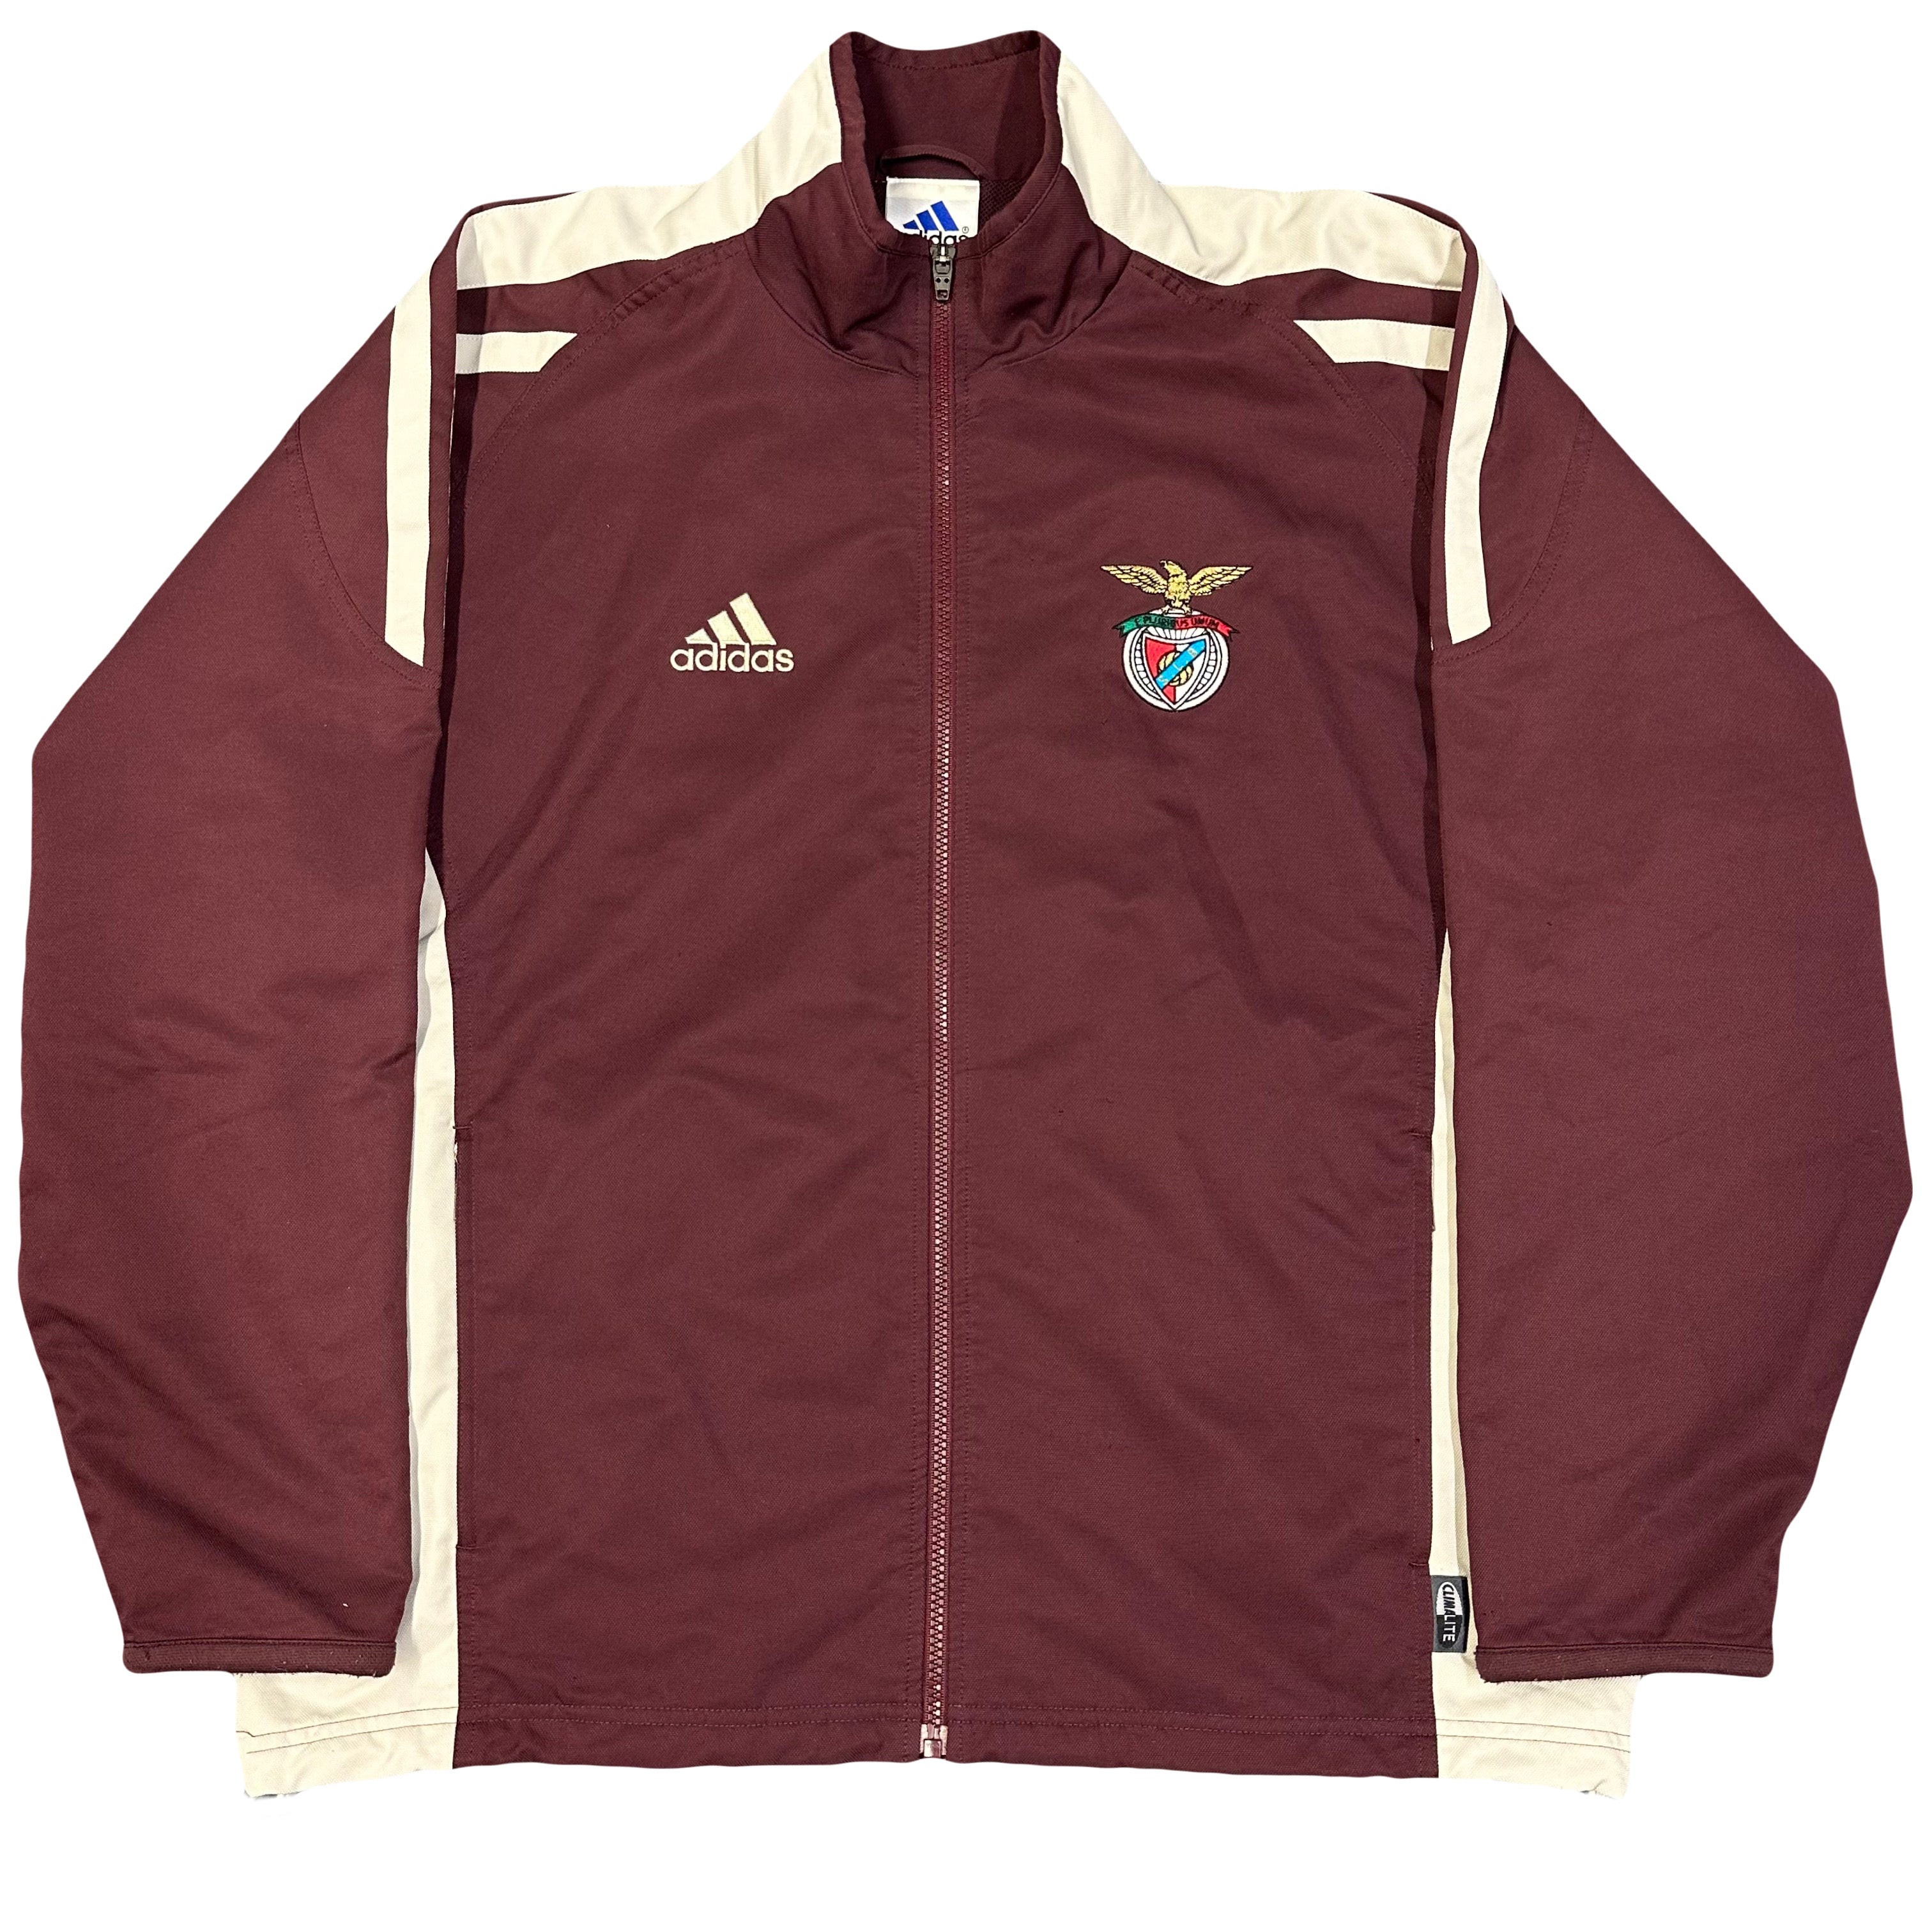 Adidas Benfica 2001/02 Tracksuit ( L )